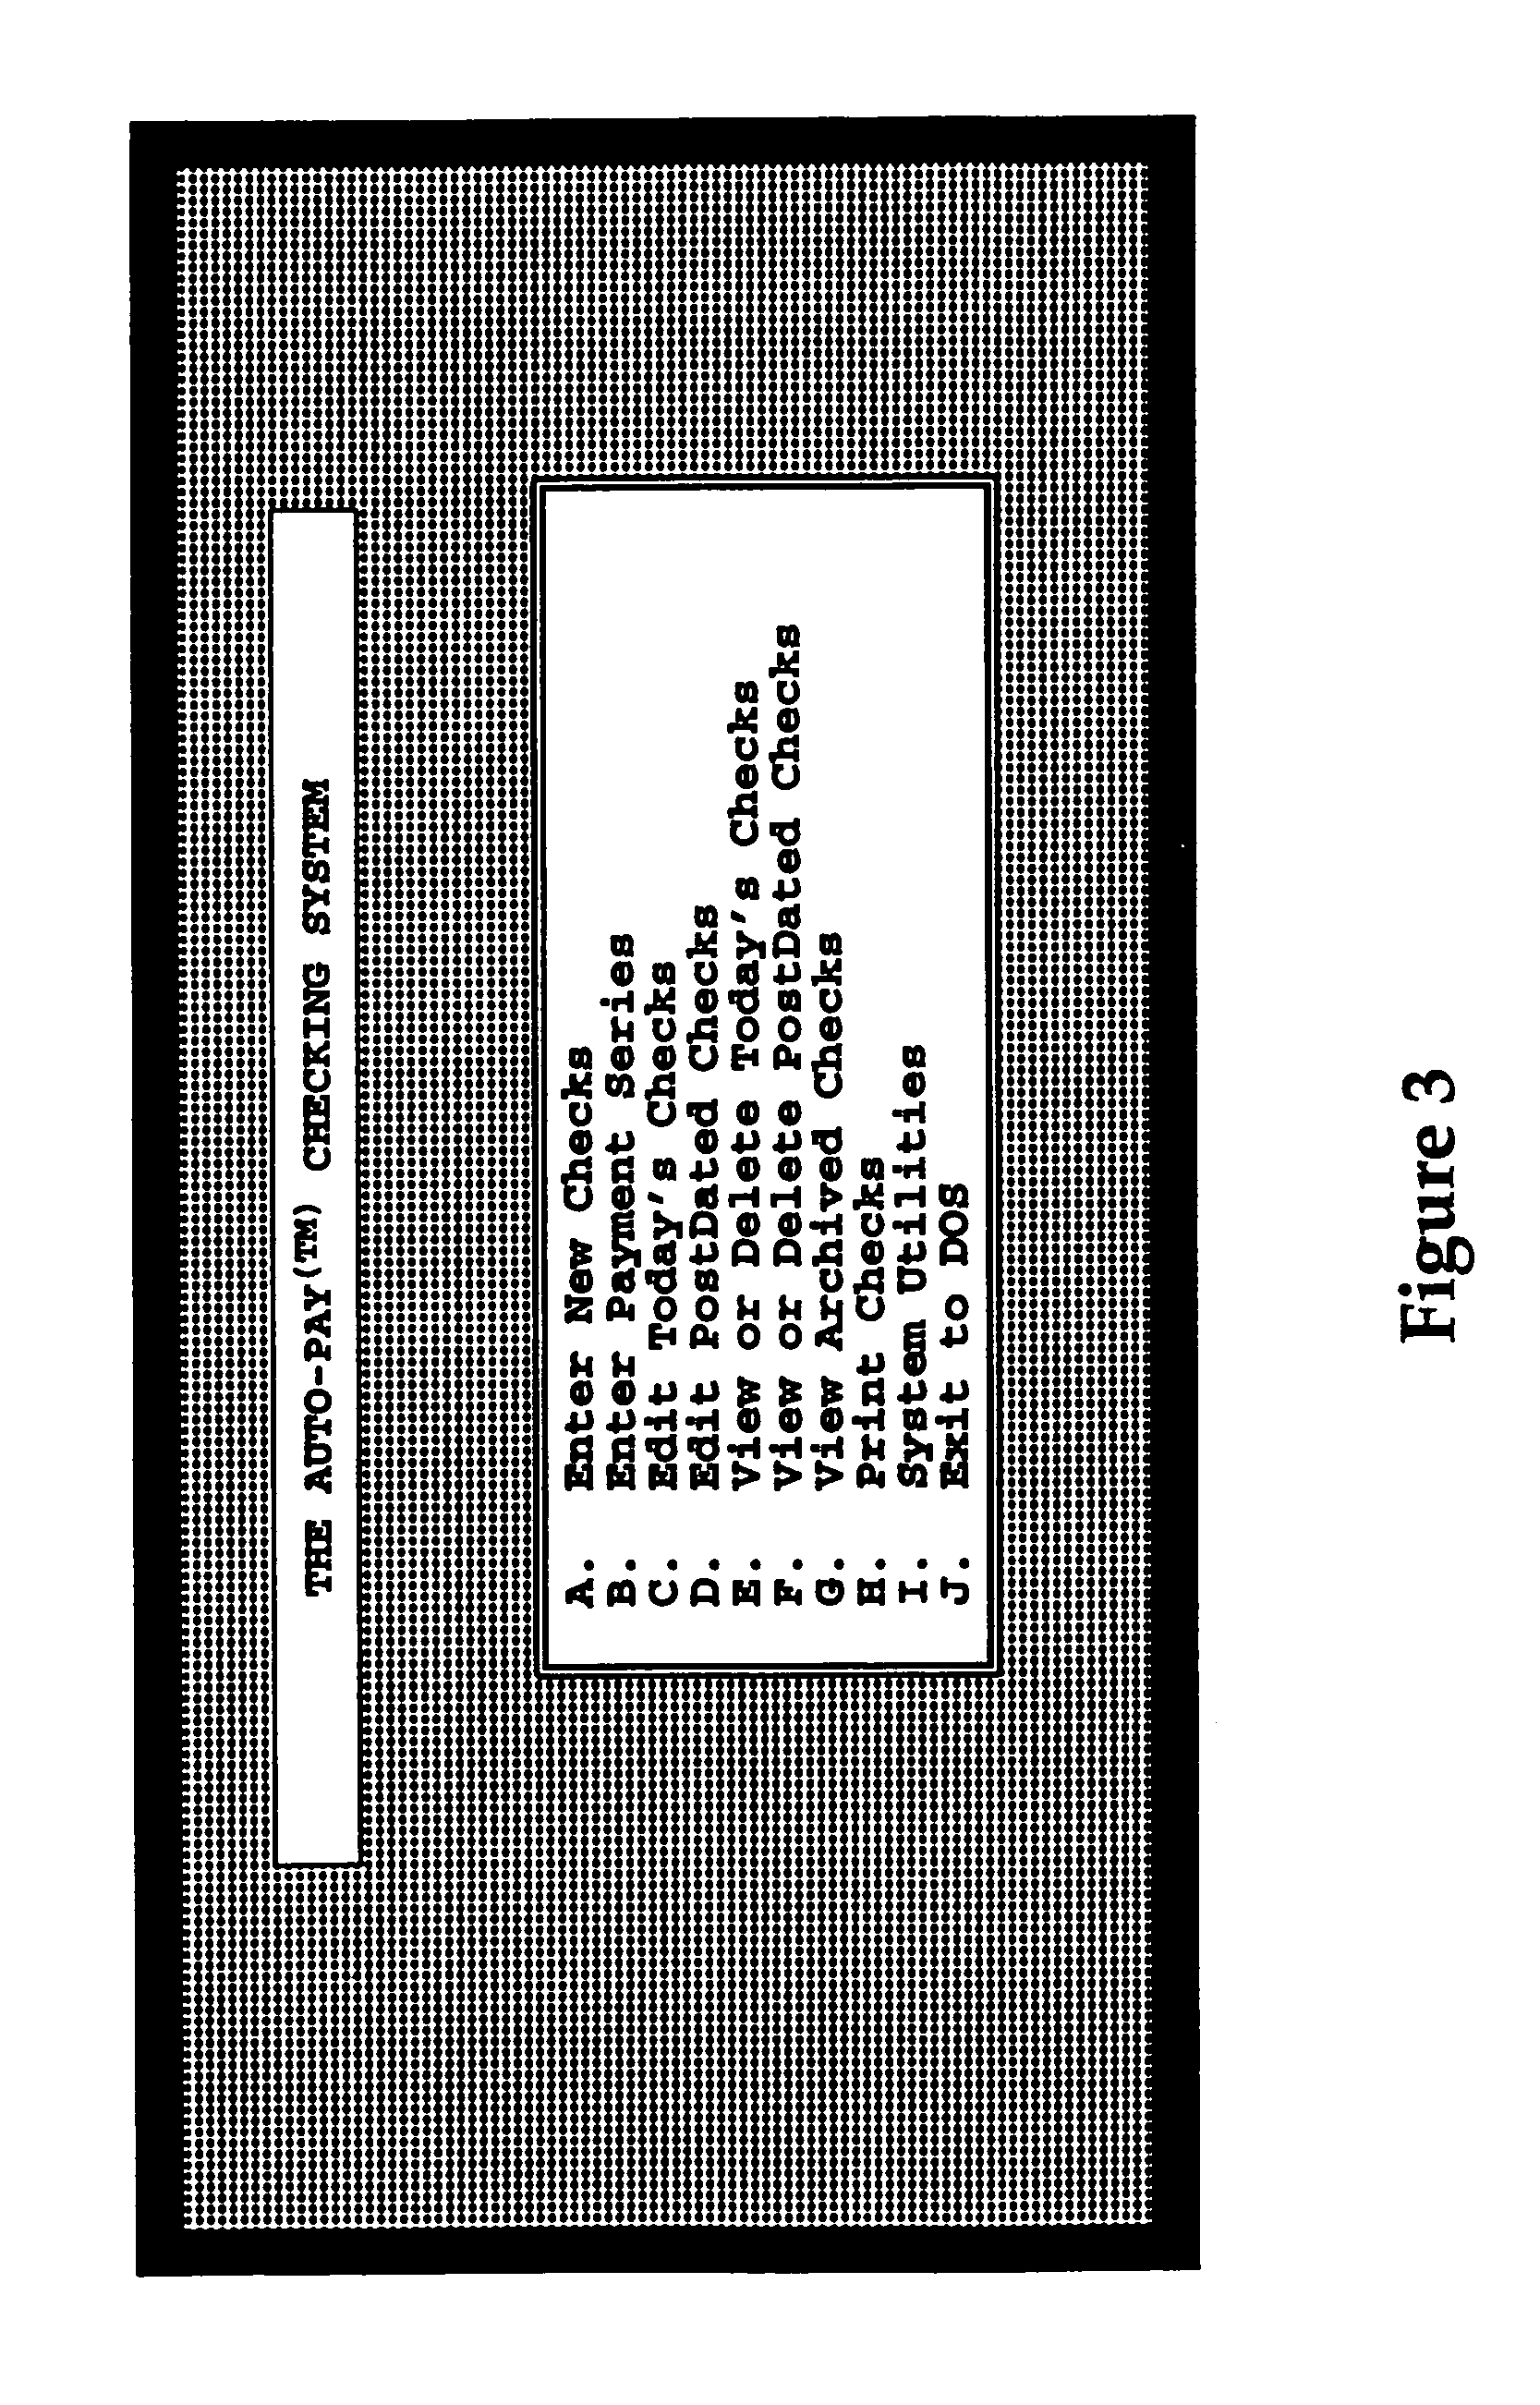 System and method for making a payment from a financial account